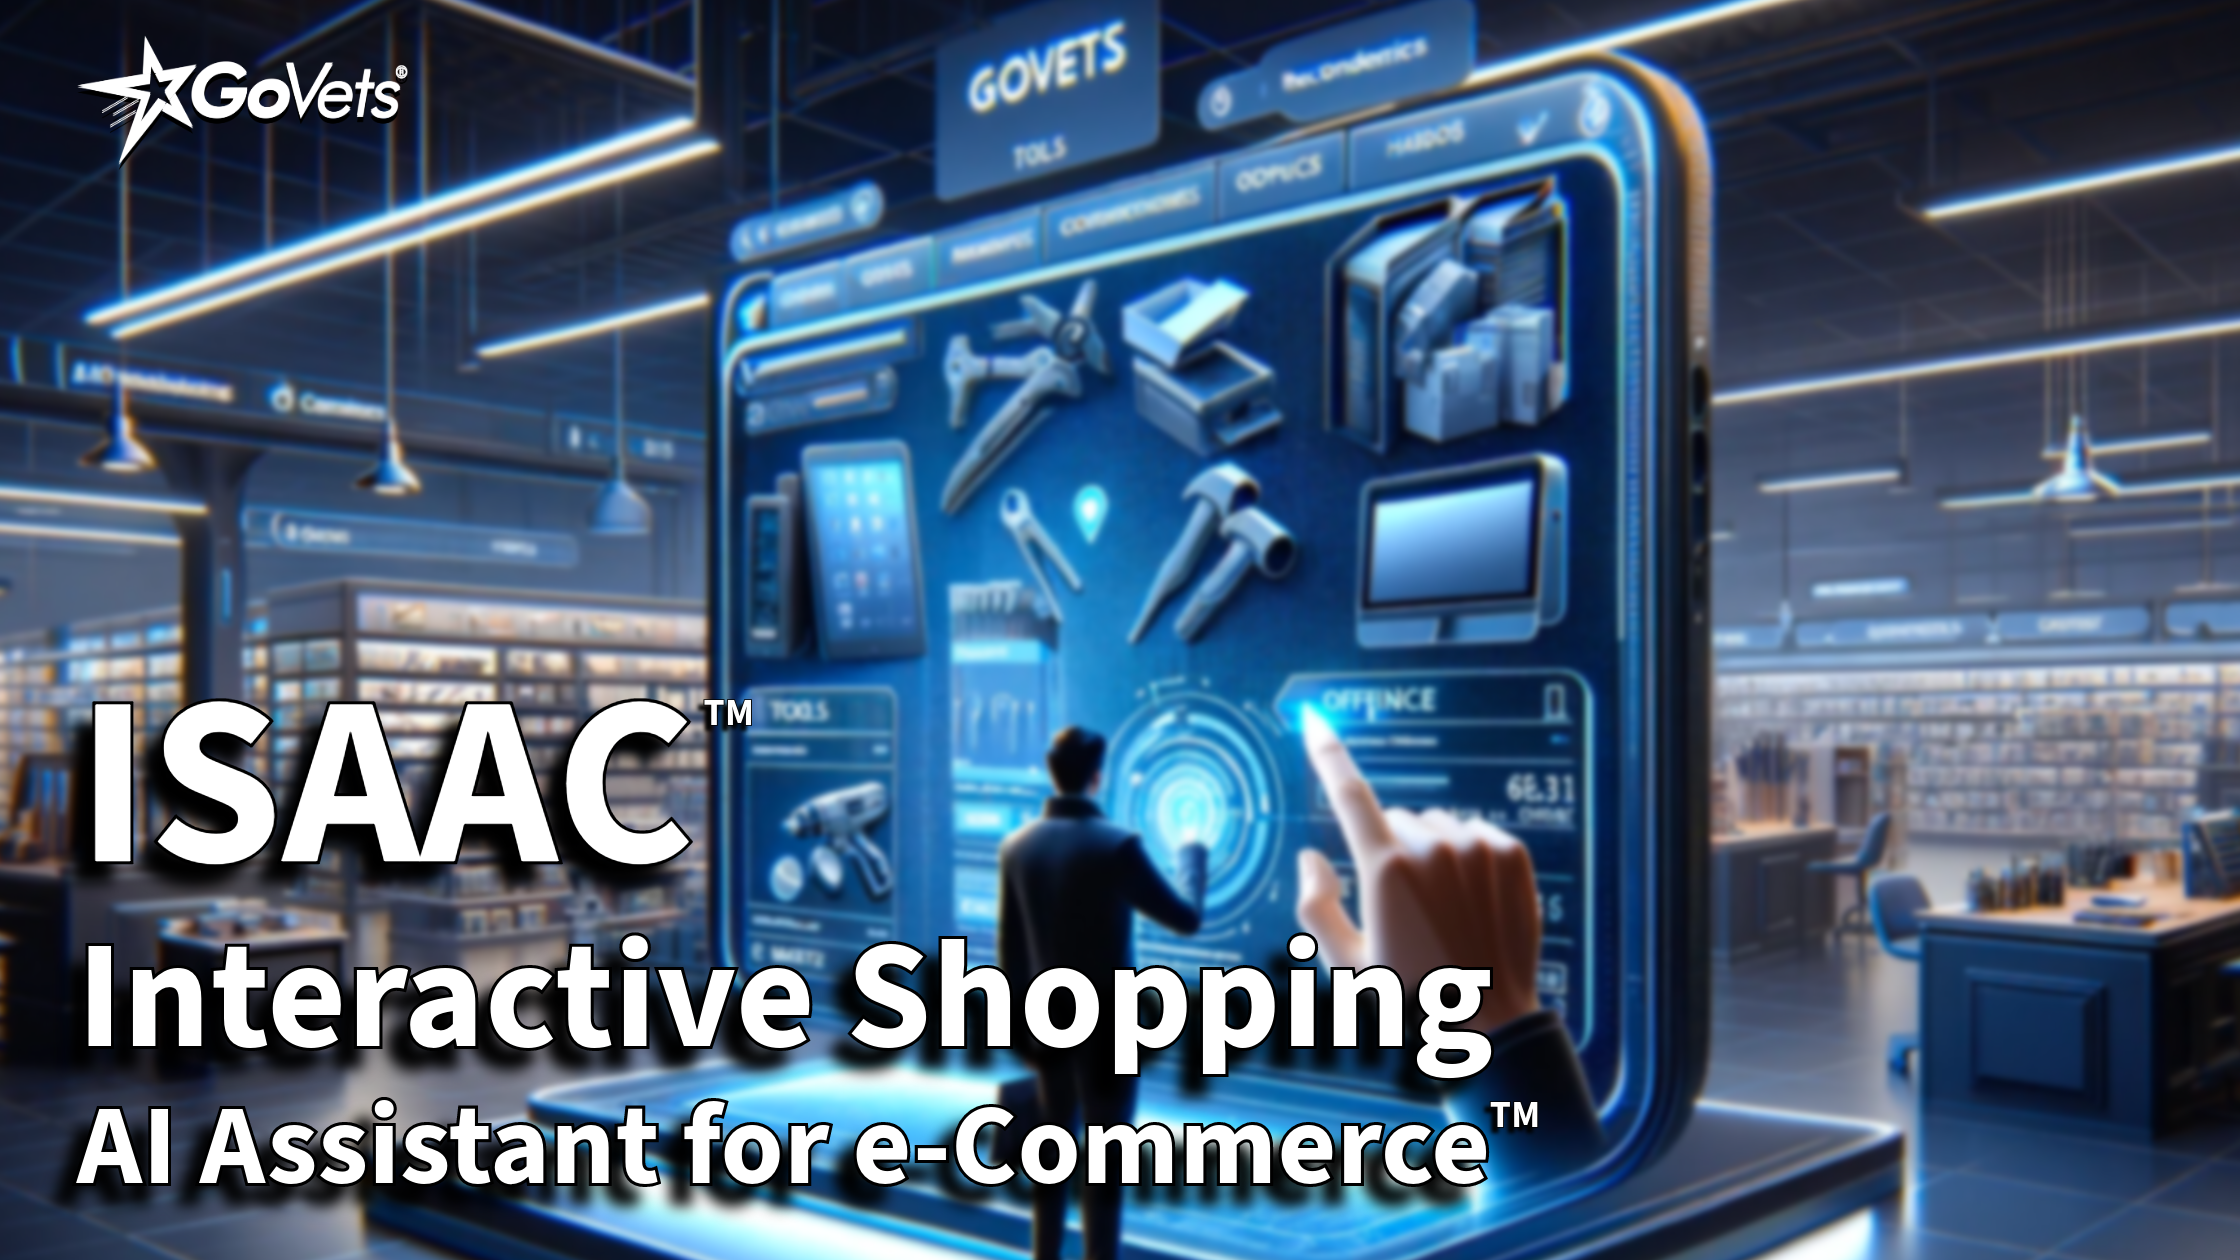 ISAAC: Your Interactive Shopping AI Assistant for eCommerce